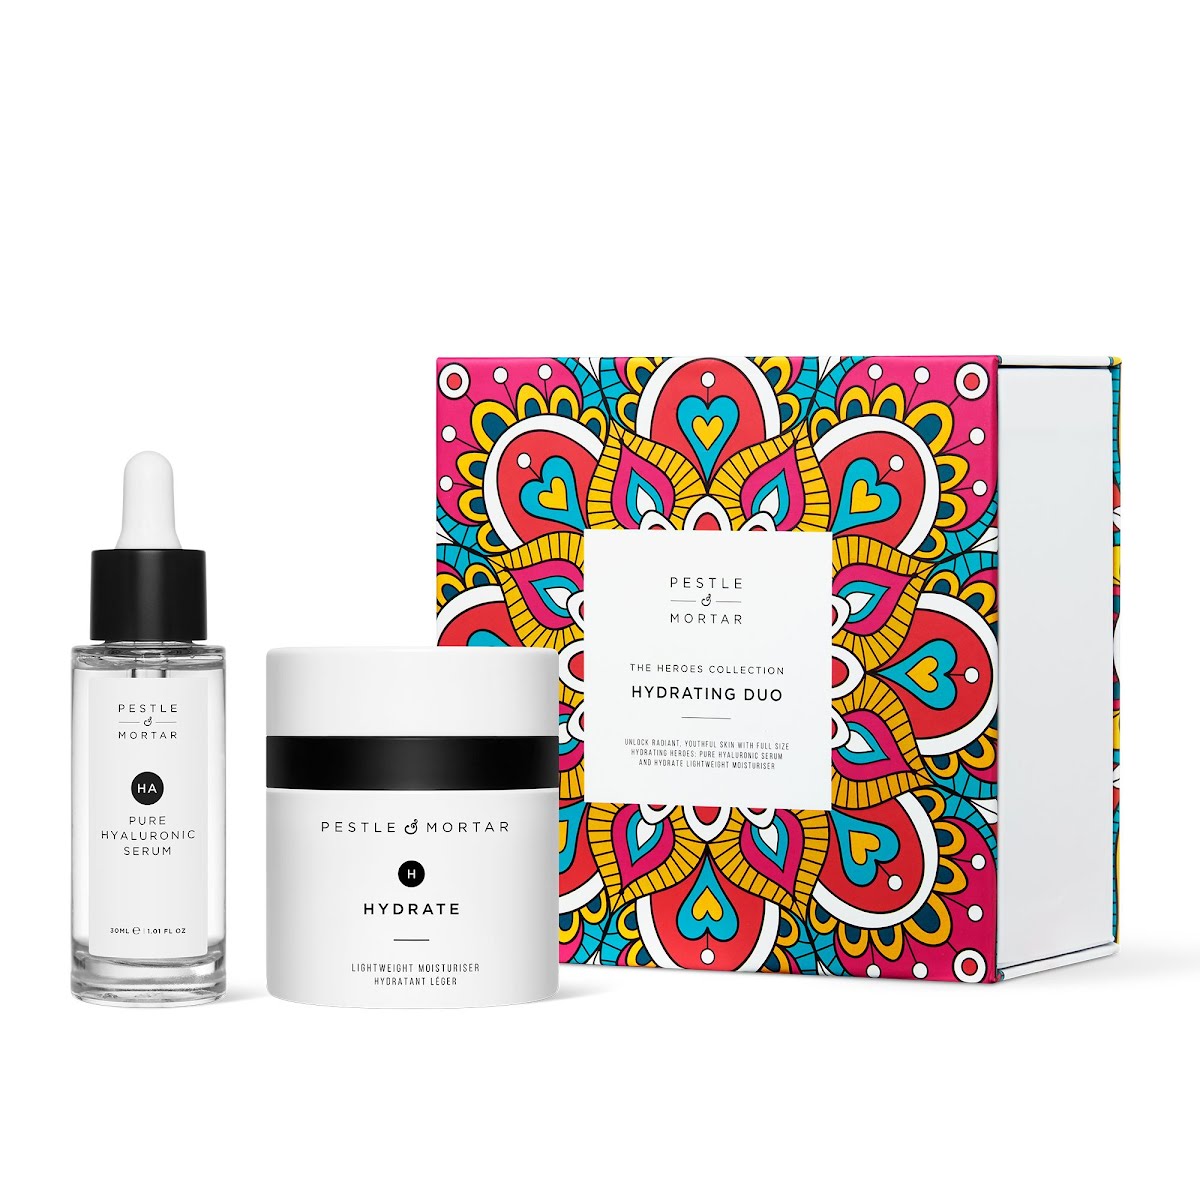 Pestle & Mortar The Heroes Collection Hydrating Duo, €62.40